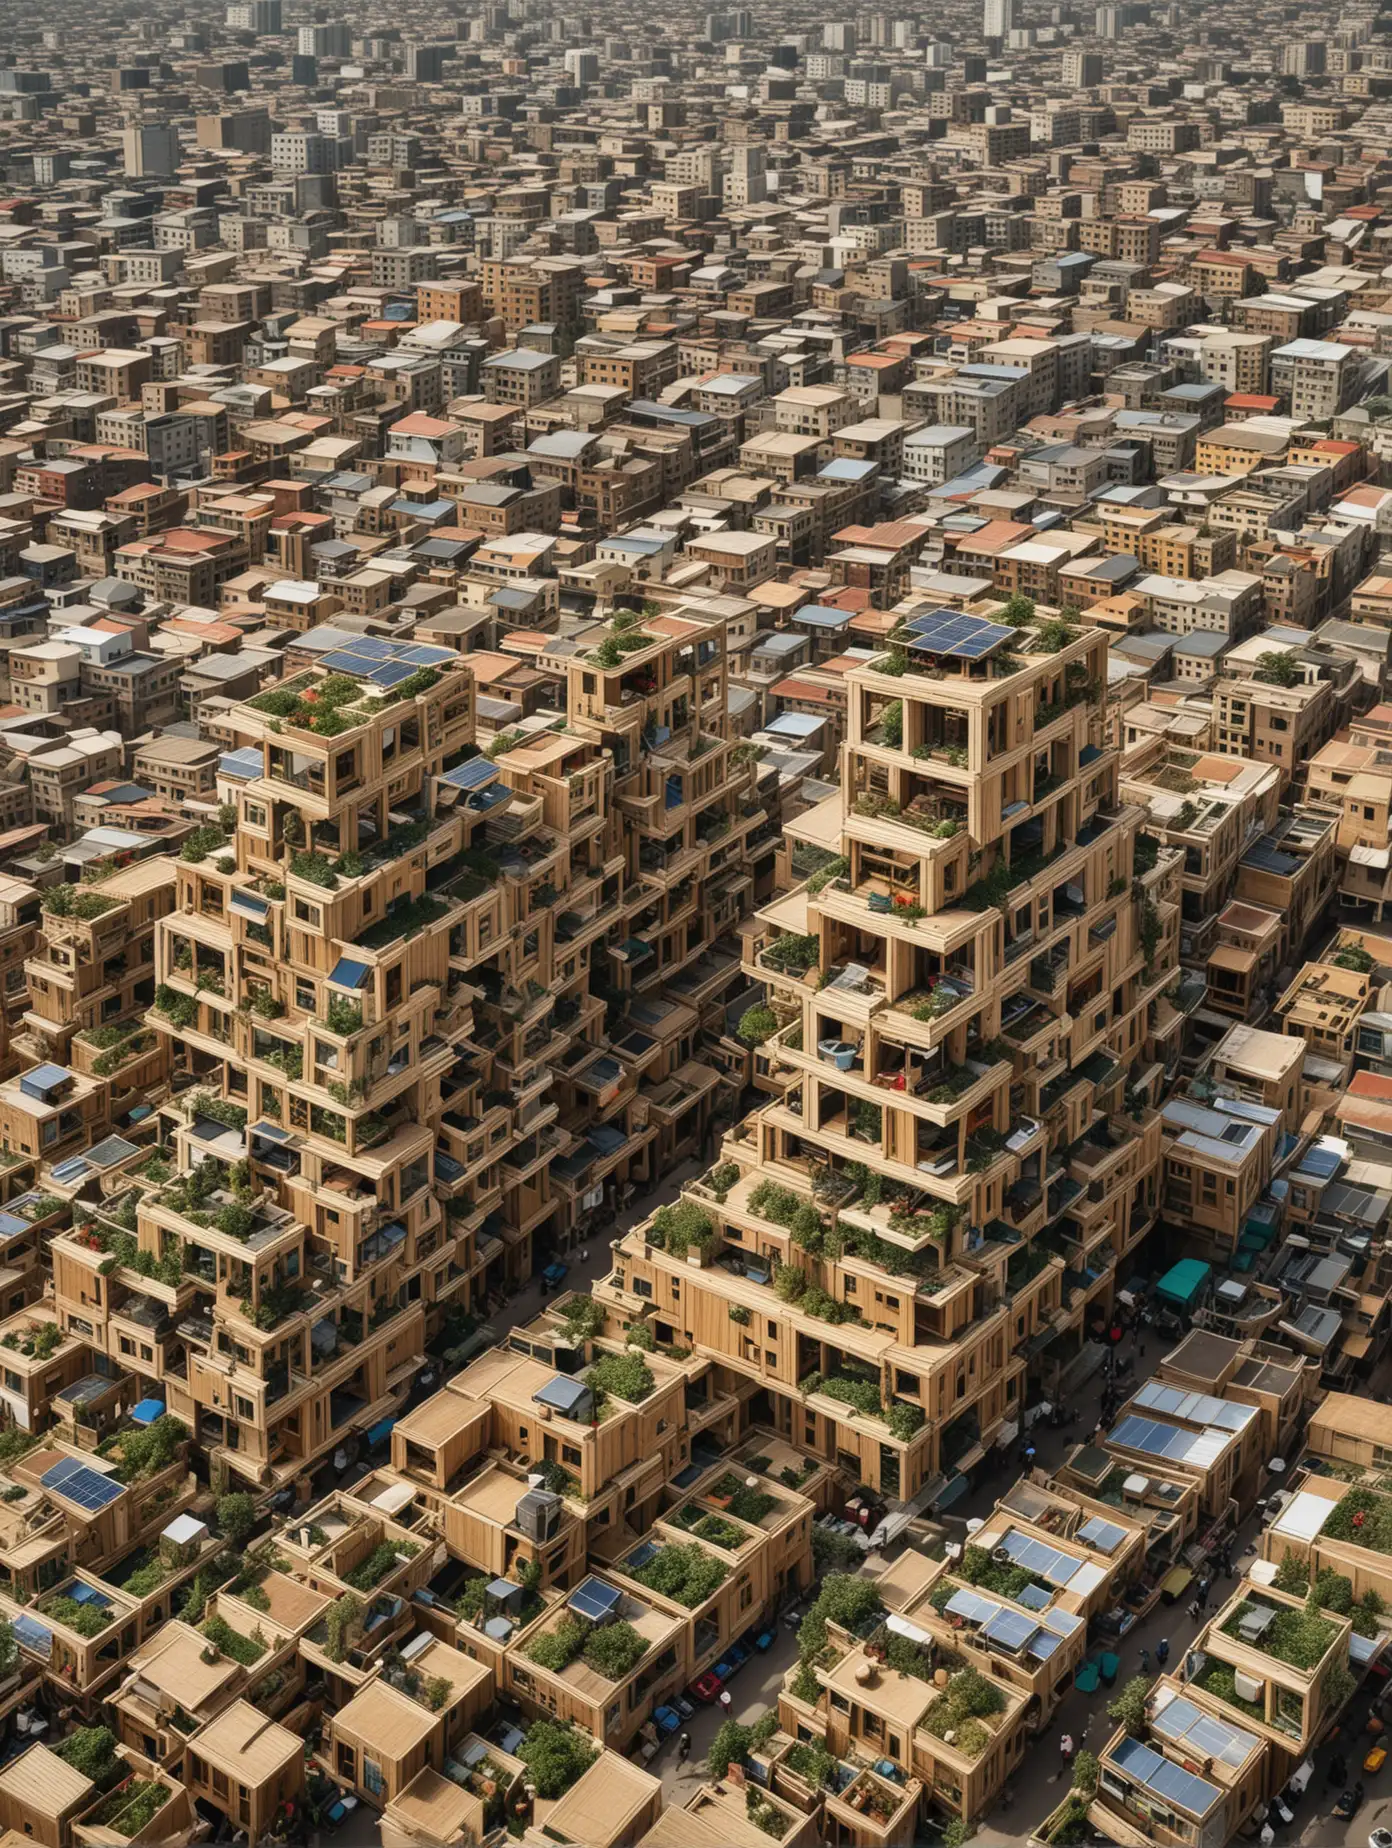 A high-resolution photograph of Lagos, Nigeria, the city´s skyline transformed by the proliferation of modular wooden building blocks in the style of metabolism architecture, with large windows and rooftop gardens for urban farming and solar panels